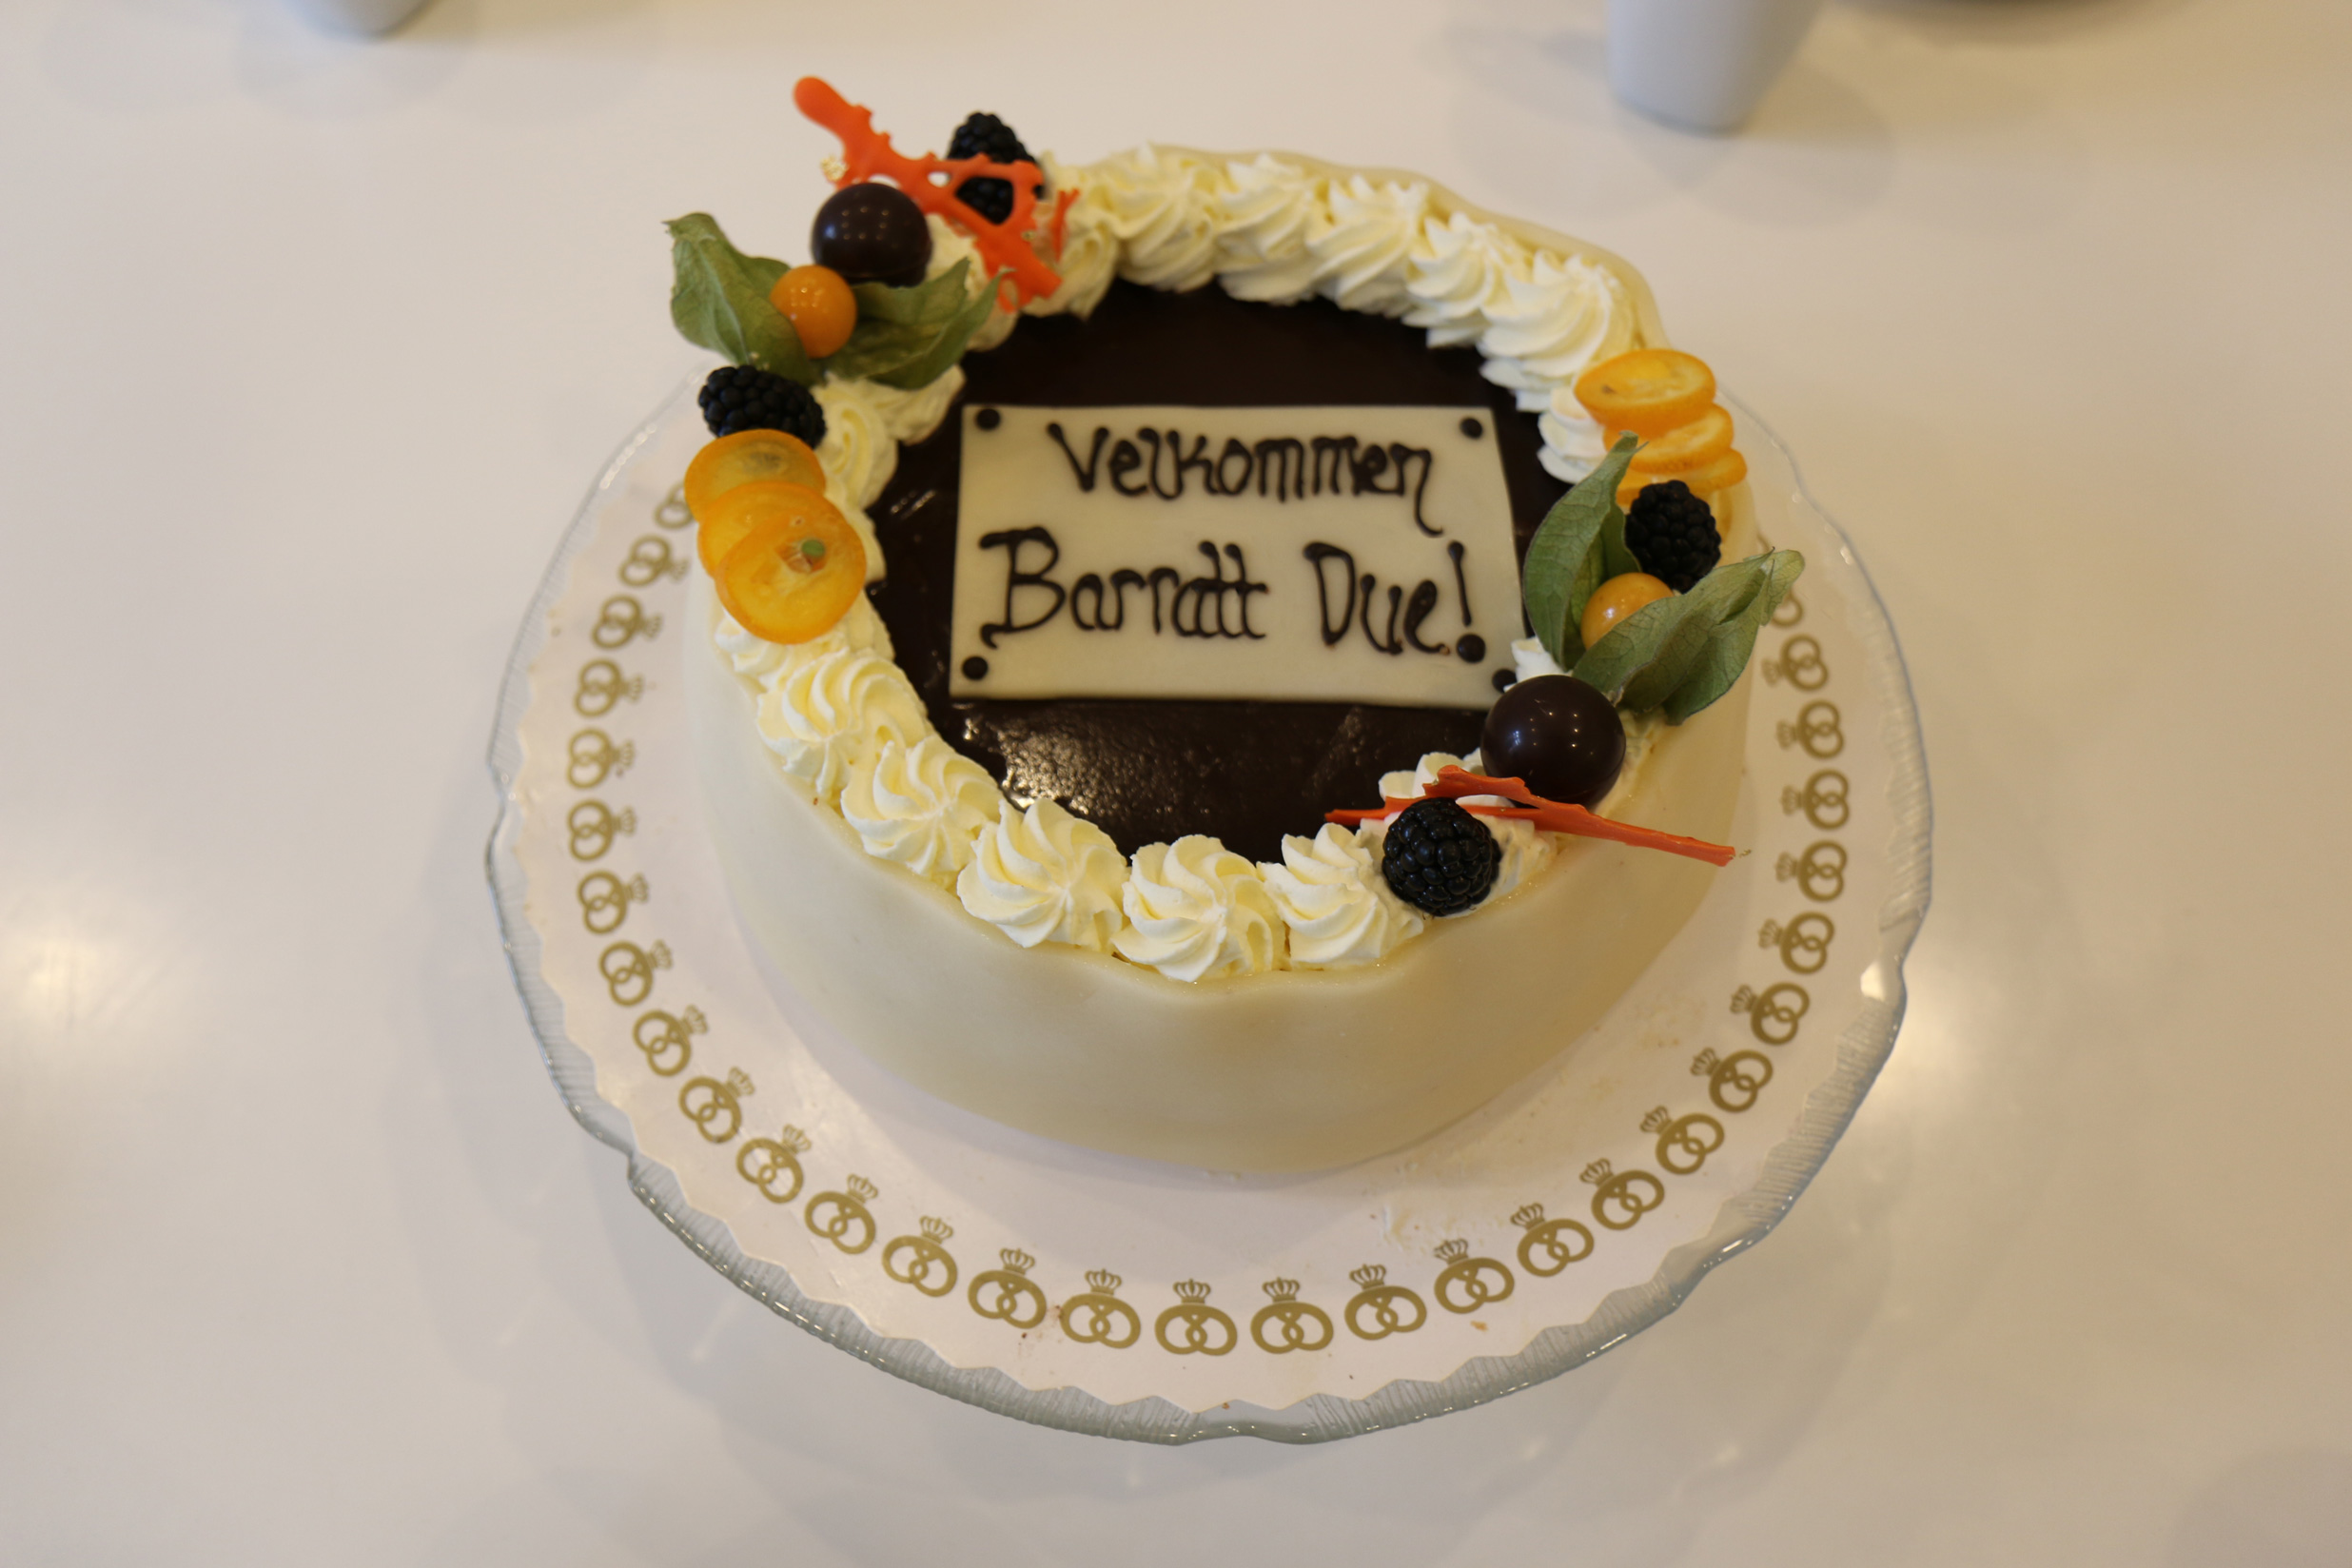 ASIMUT welcome cake for the Barratt Due Institute